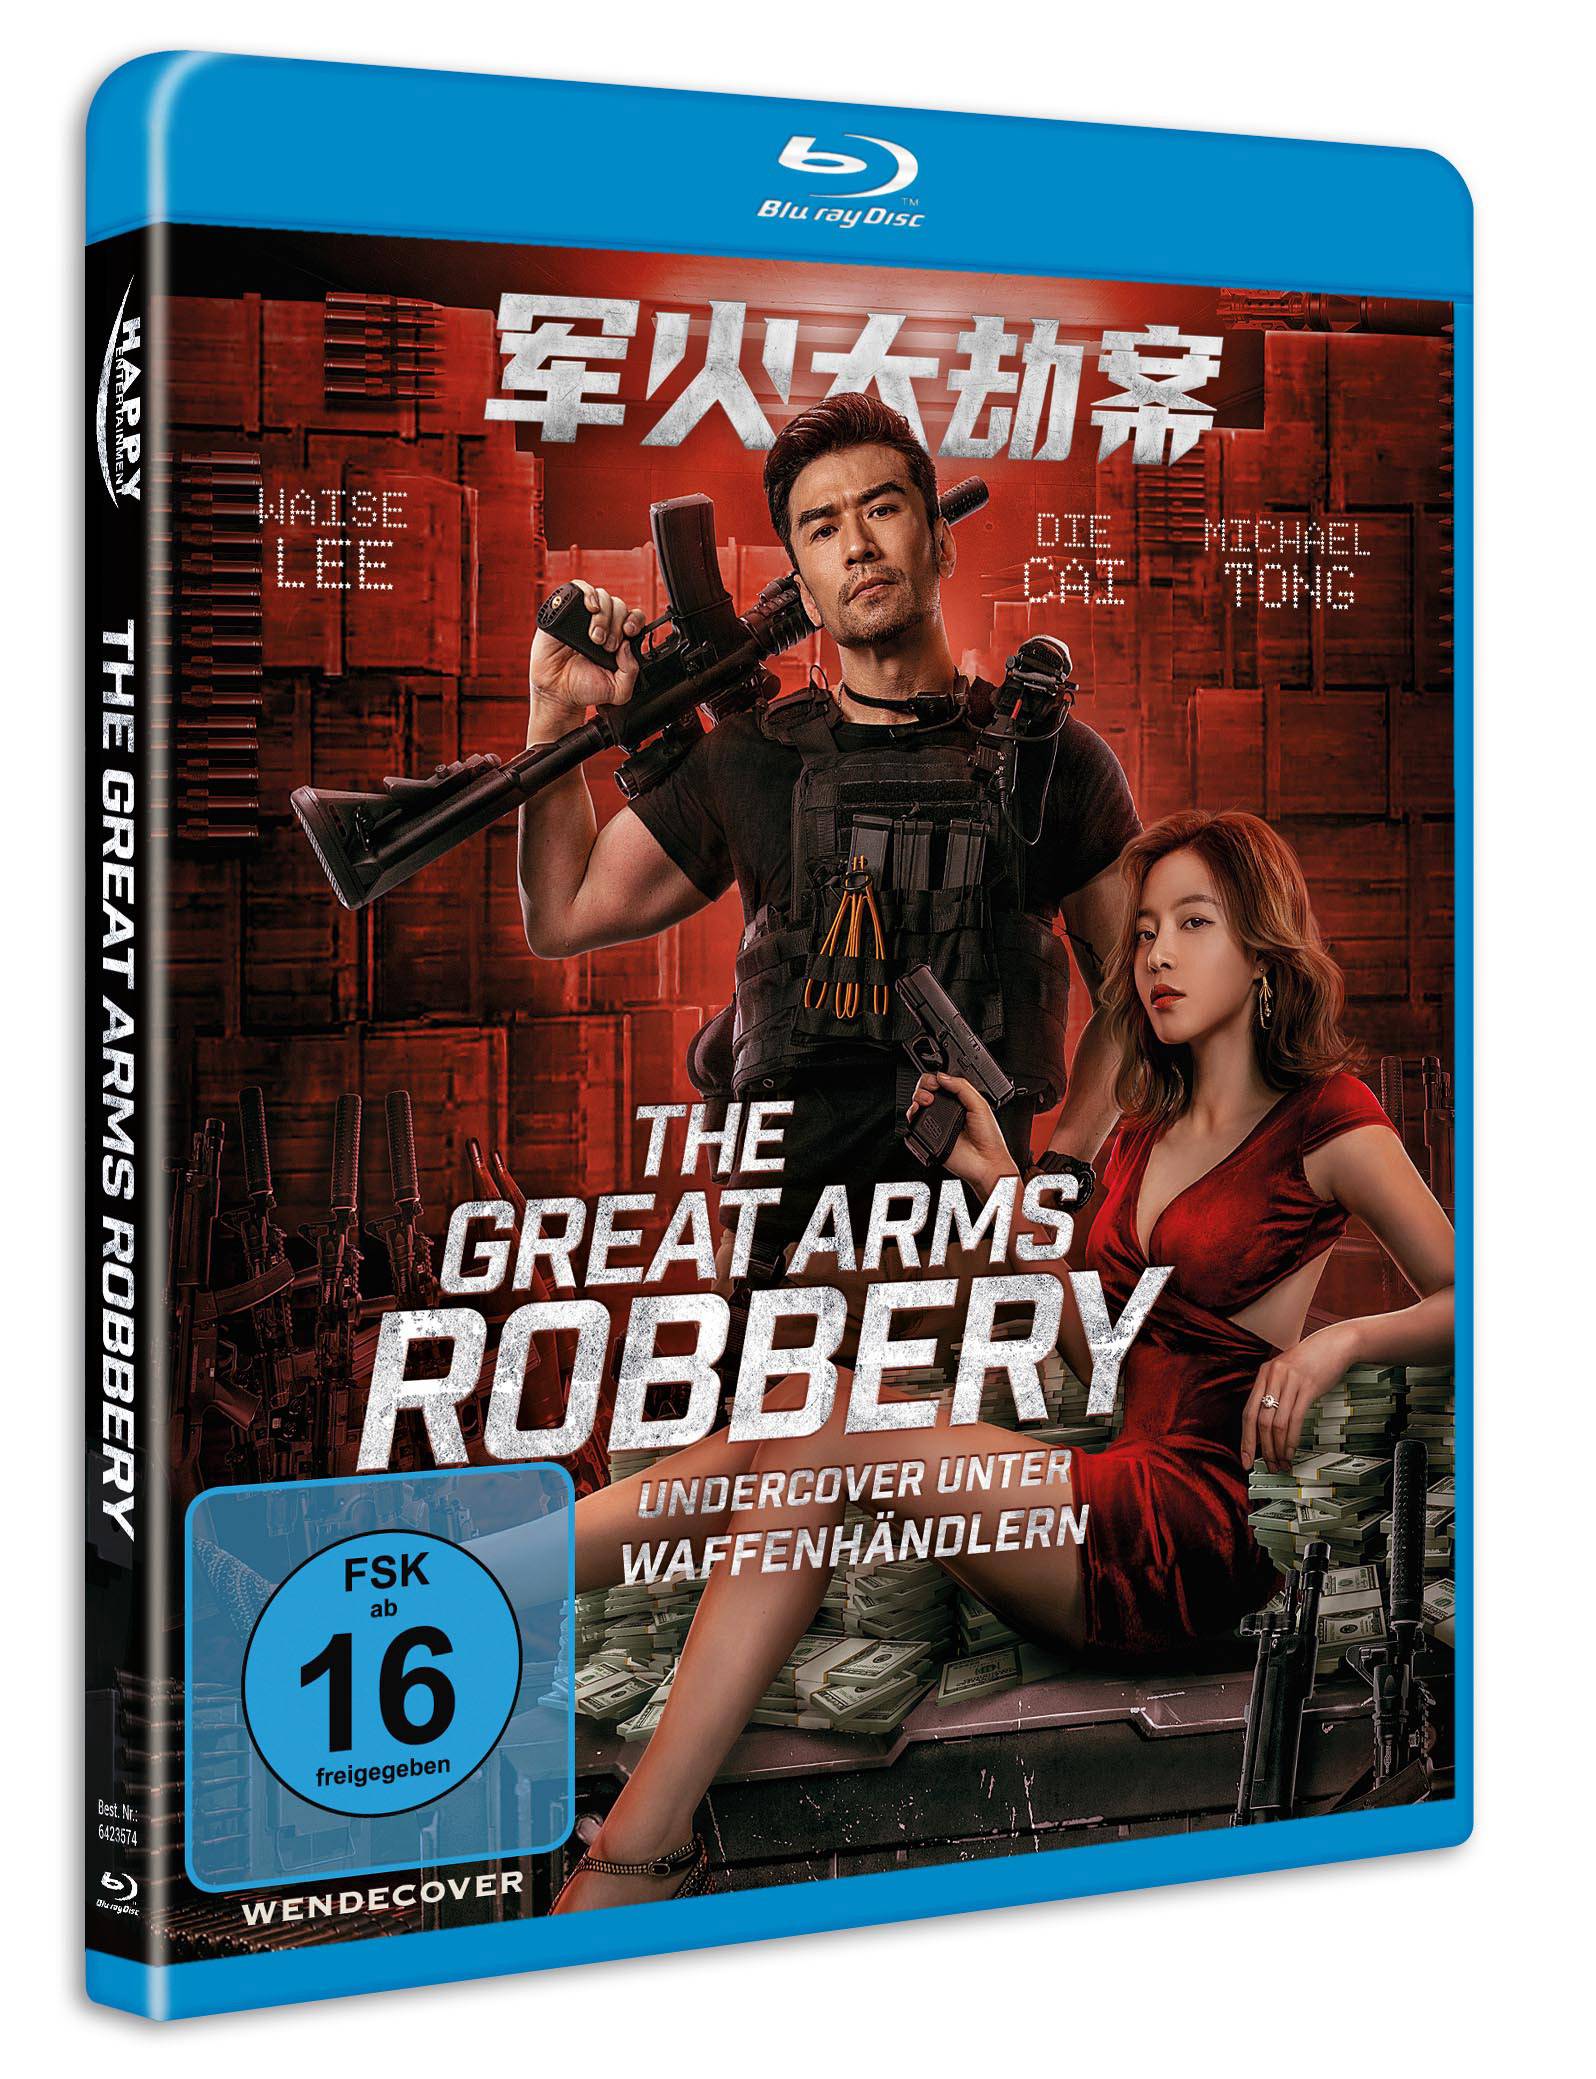 The Great Arms Robbery – Undercover unter Waffenhändlern